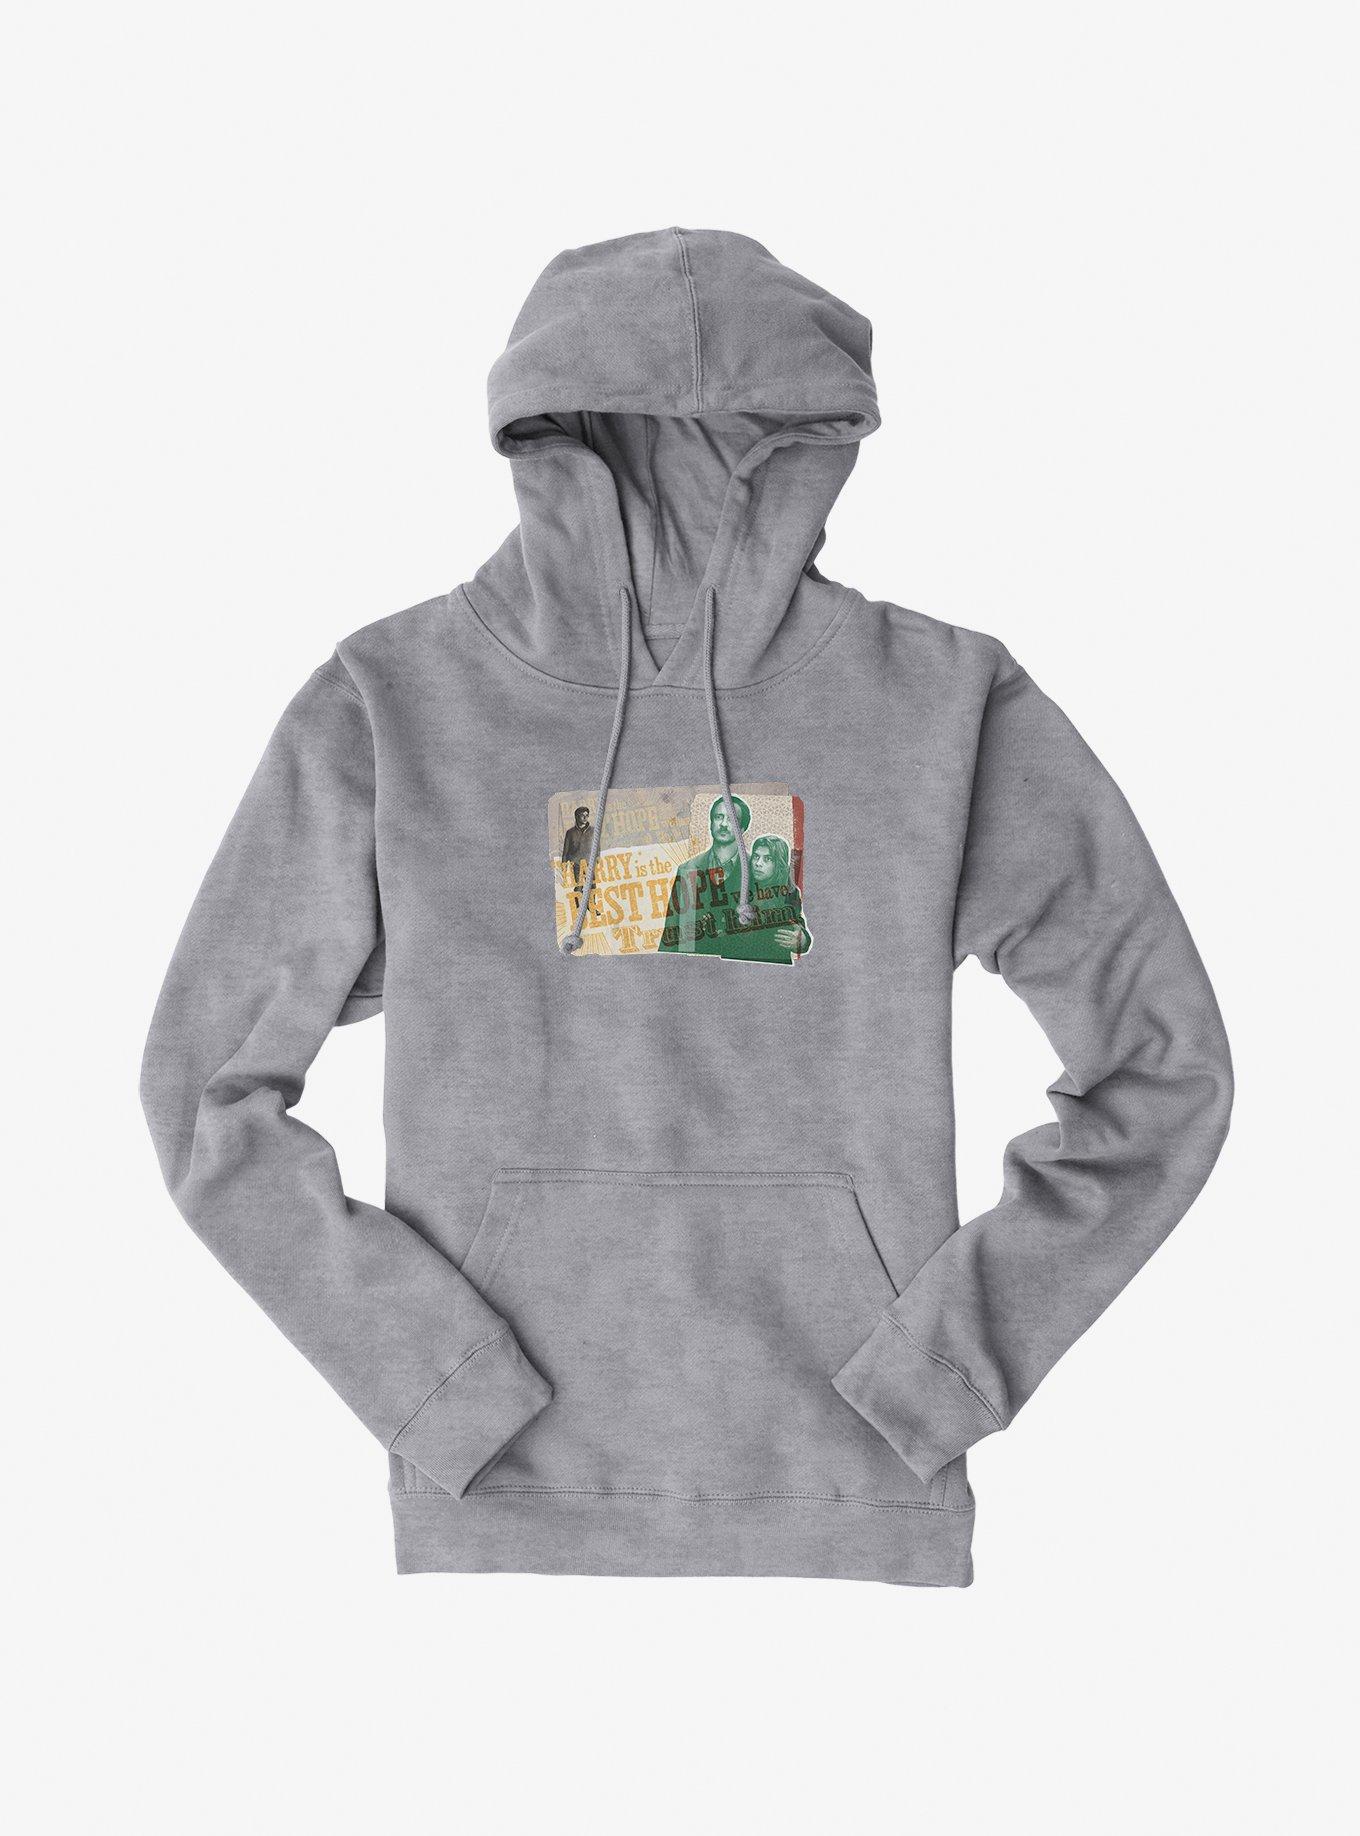 Harry Potter The Best Hope We Have Collage Hoodie, HEATHER GREY, hi-res